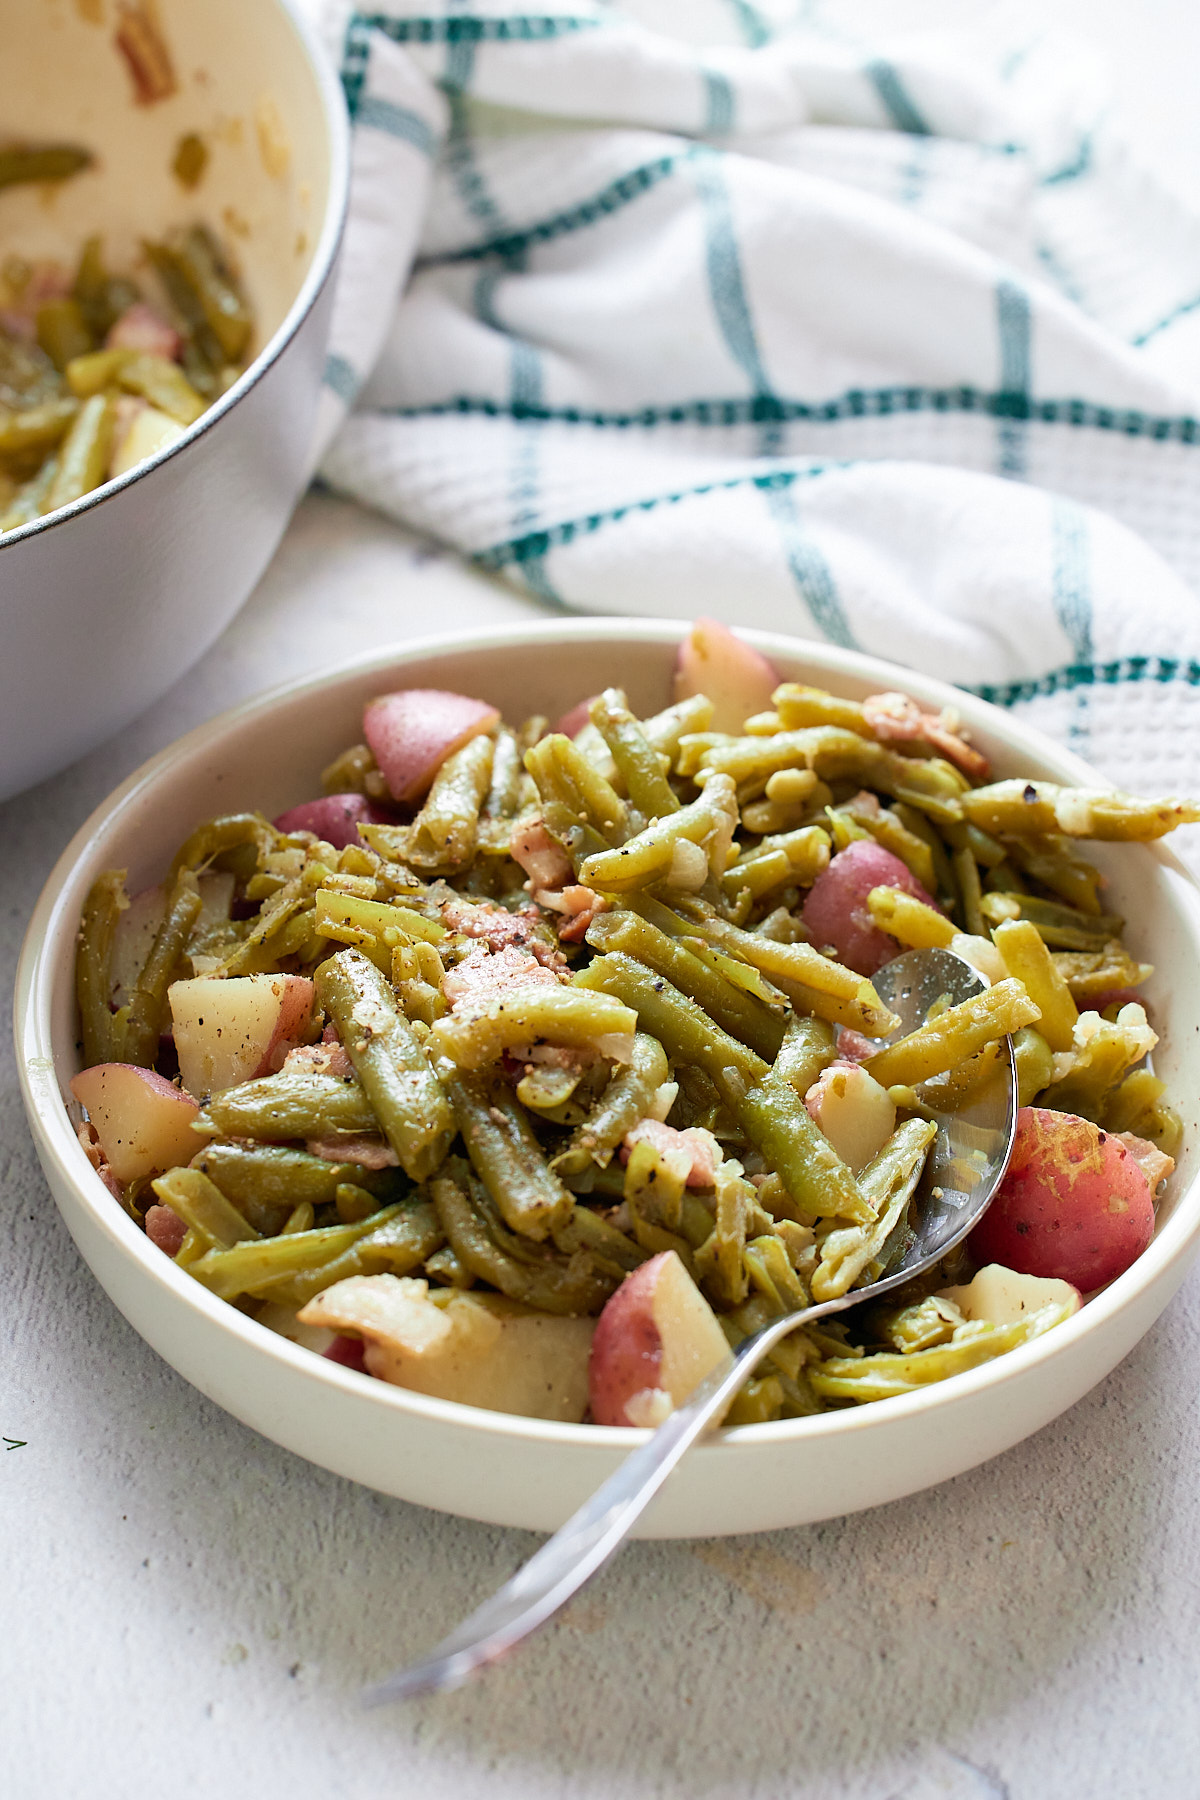 https://blackpeoplesrecipes.com/wp-content/uploads/2022/03/southern-green-beans-and-potatoes-0112.jpg